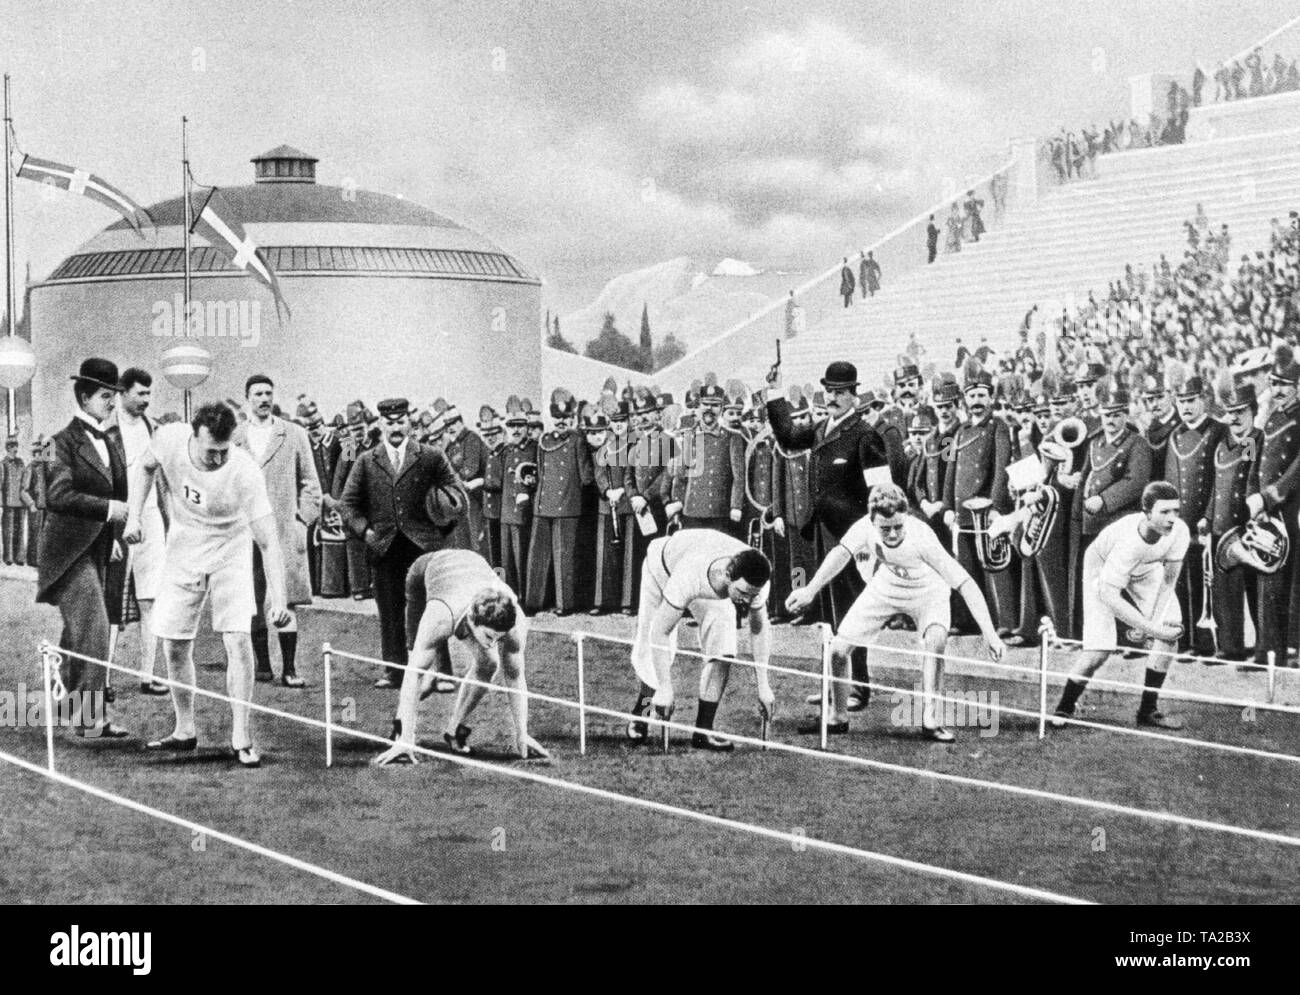 Drawing of the first modern Olympic Games in Athens: At the start of the 100 meters final run the runners take different positions. The American Burke (2nd from left) wins the race as he started with a modern crouch start. Stock Photo